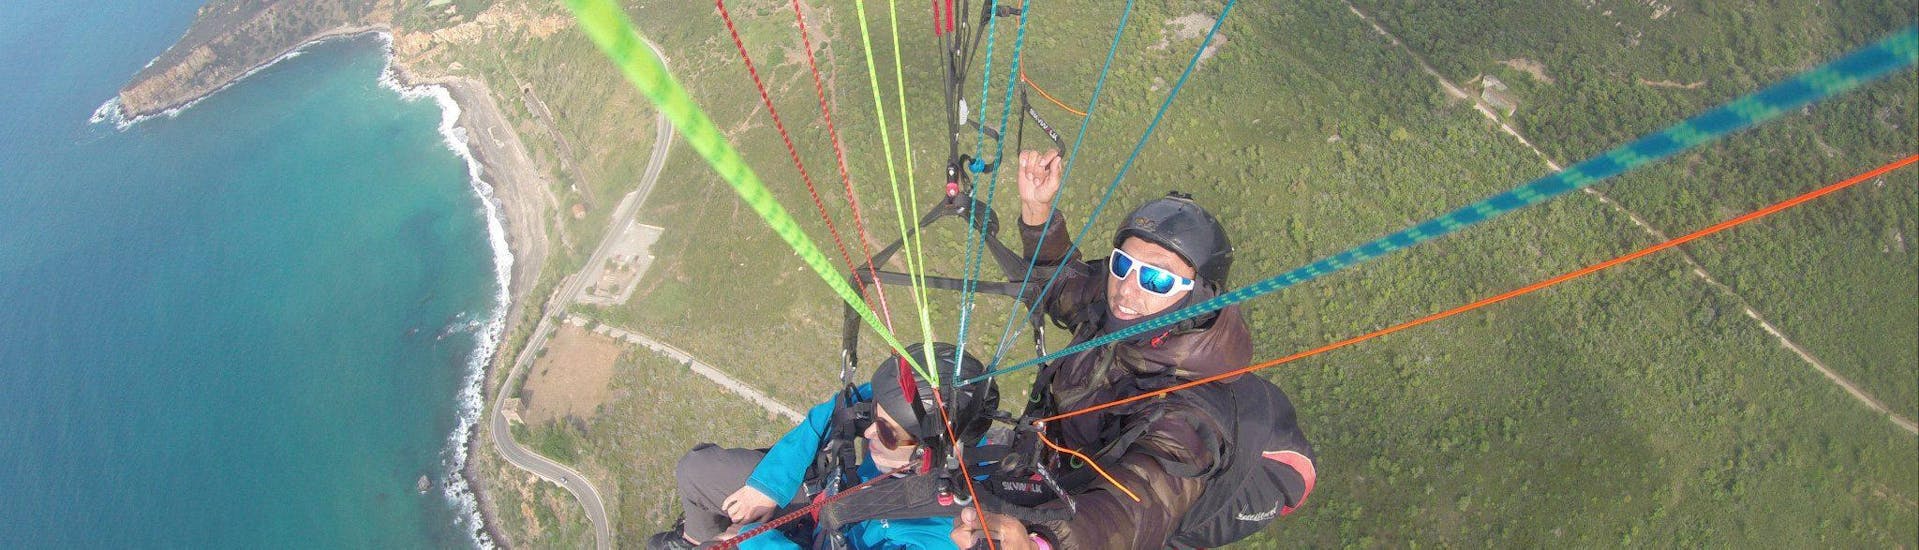 Two people smiling at the camera during the Tandem Paragliding from Taormina to Letojanni Beach.